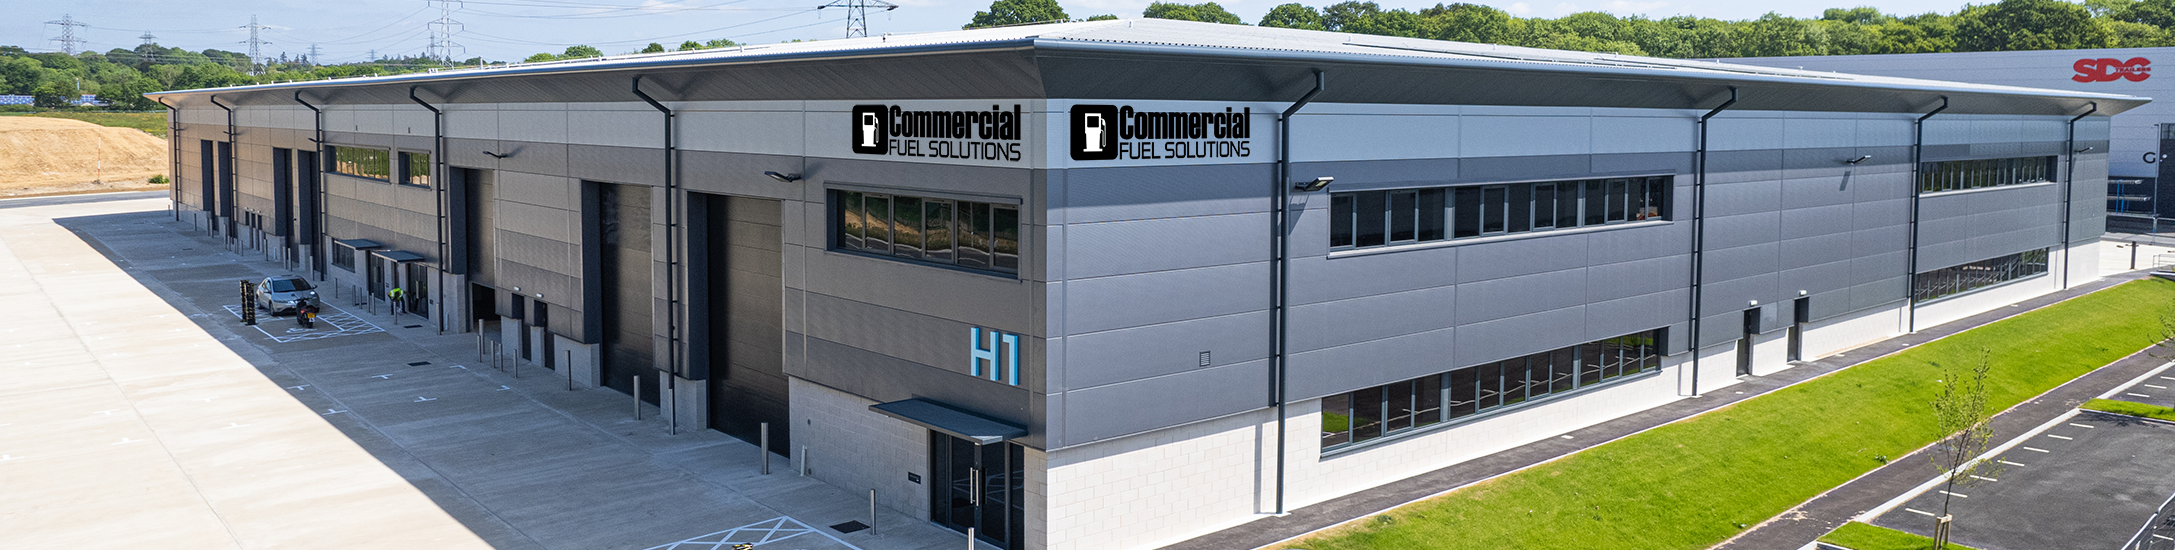 H1, Commercial Fuel Solutions New Facility